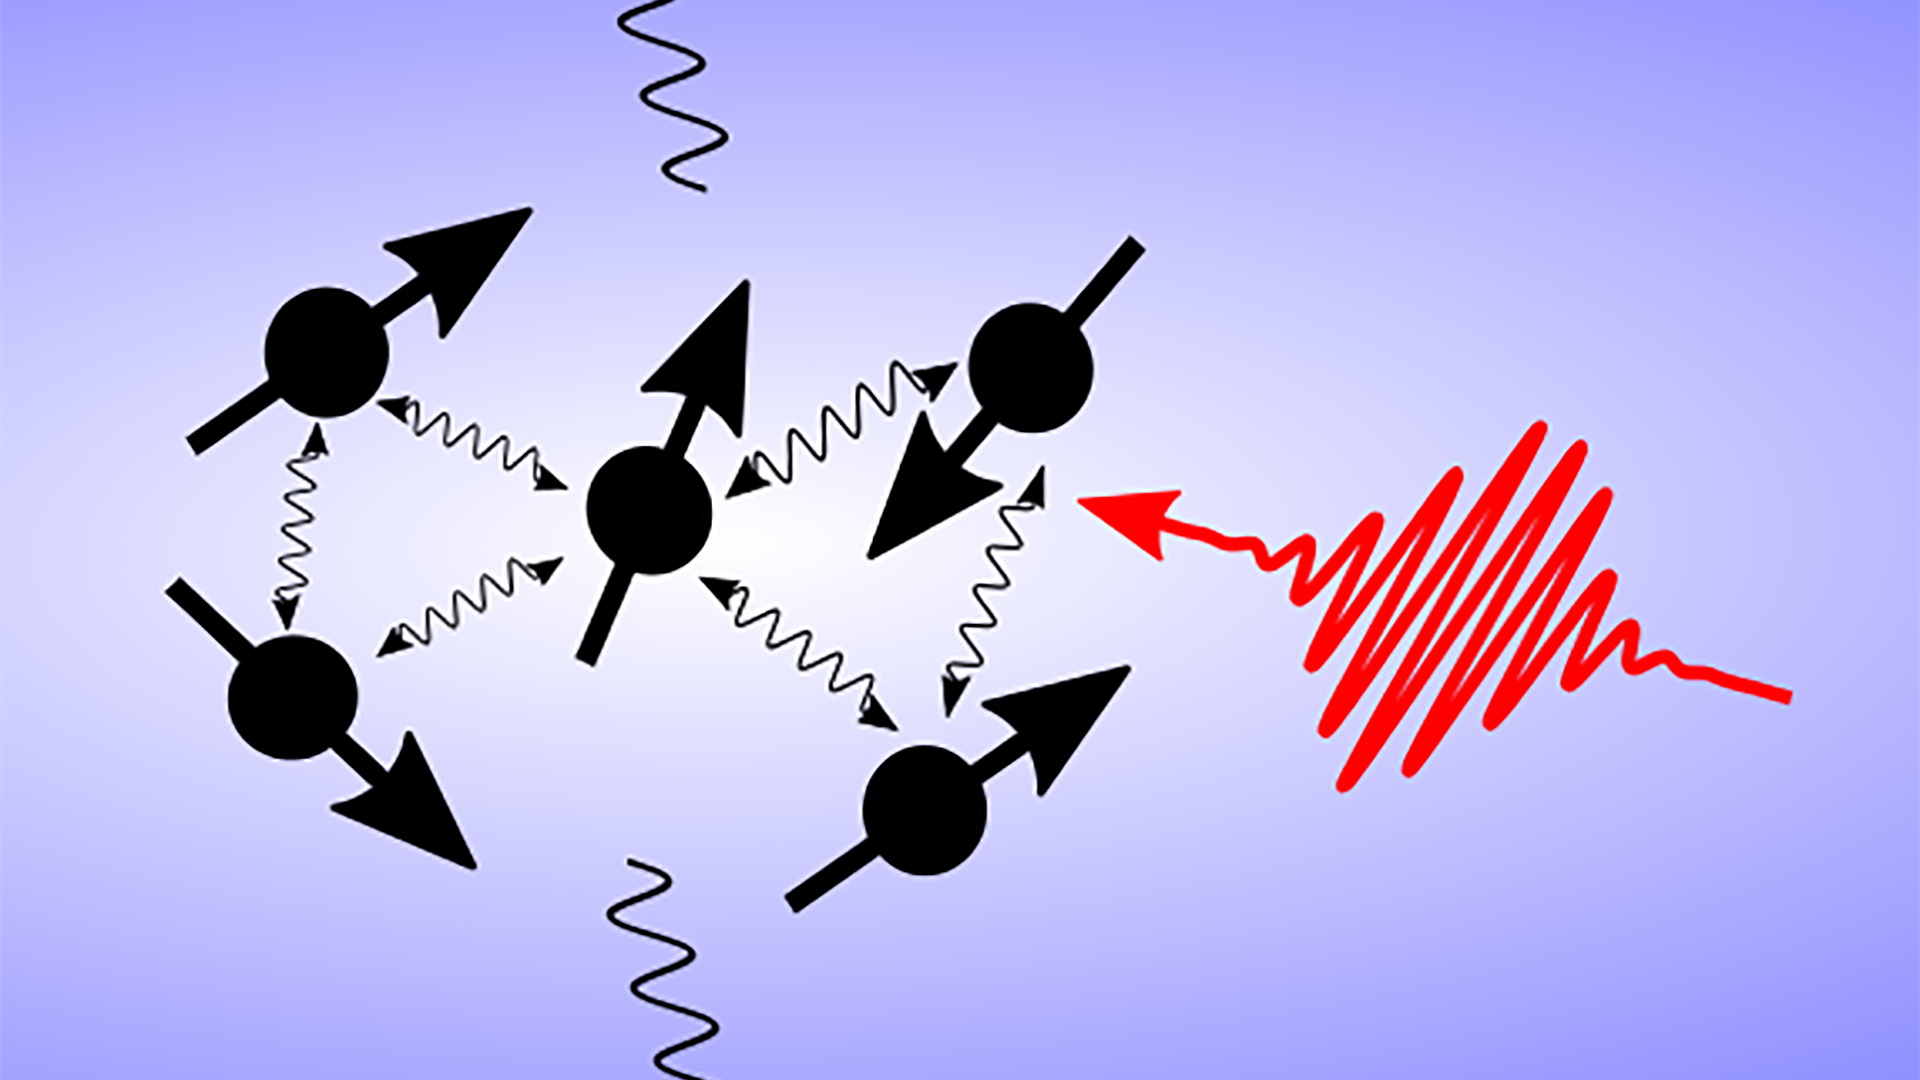 Cartoon of an open quantum system. Spins interact with each other but also lose information to the environment. A laser pulse provides control and processing of the information.